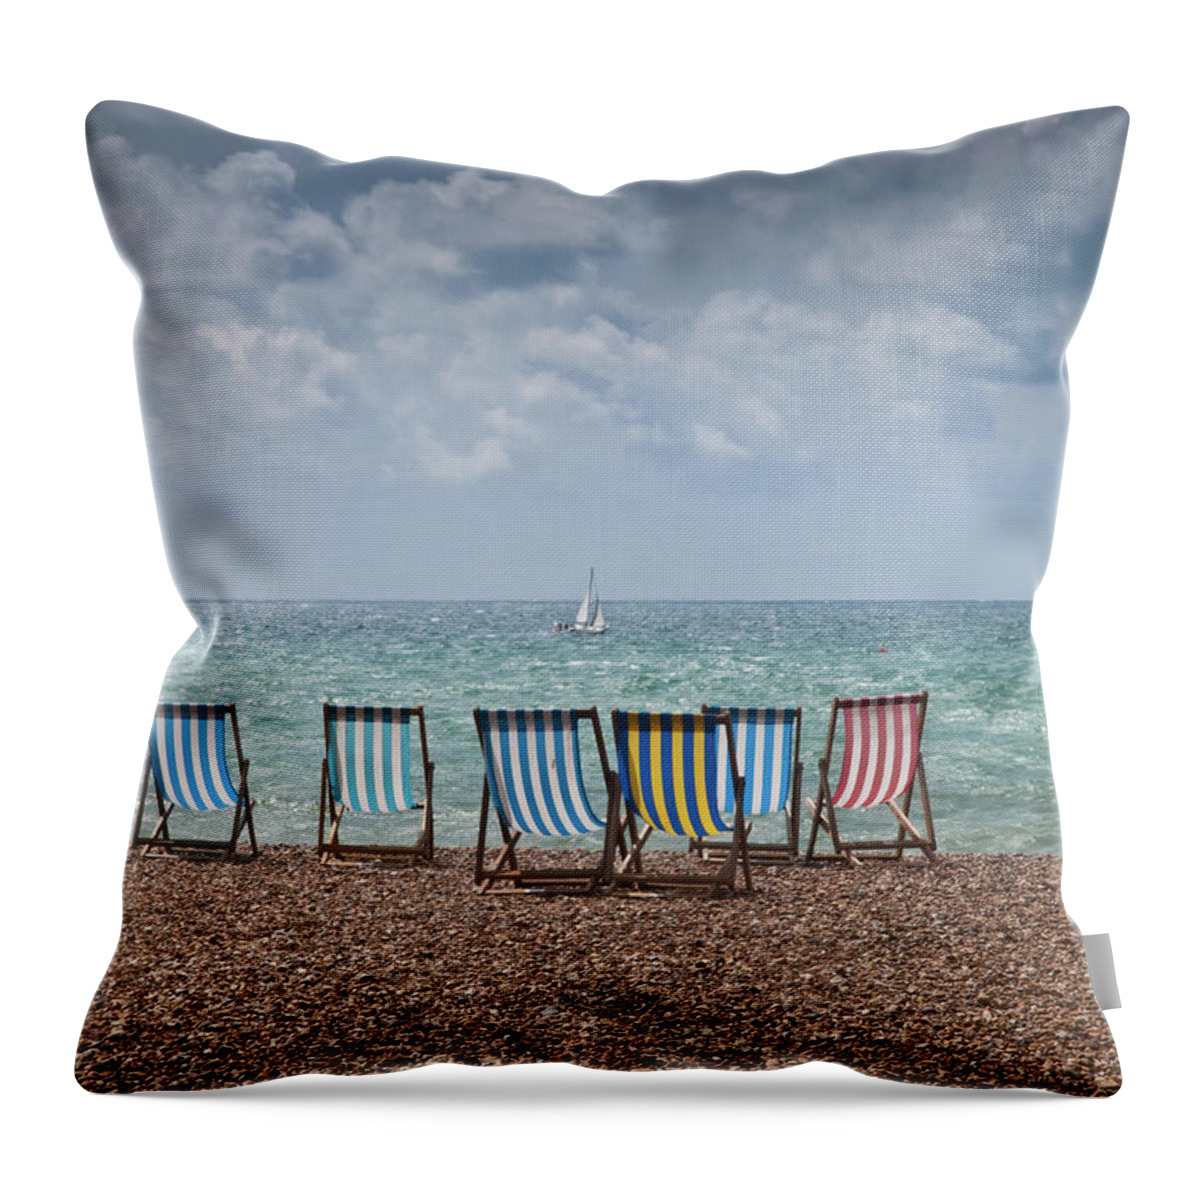 Outdoors Throw Pillow featuring the photograph Deck Chairs And Yacht by Darren Lehane